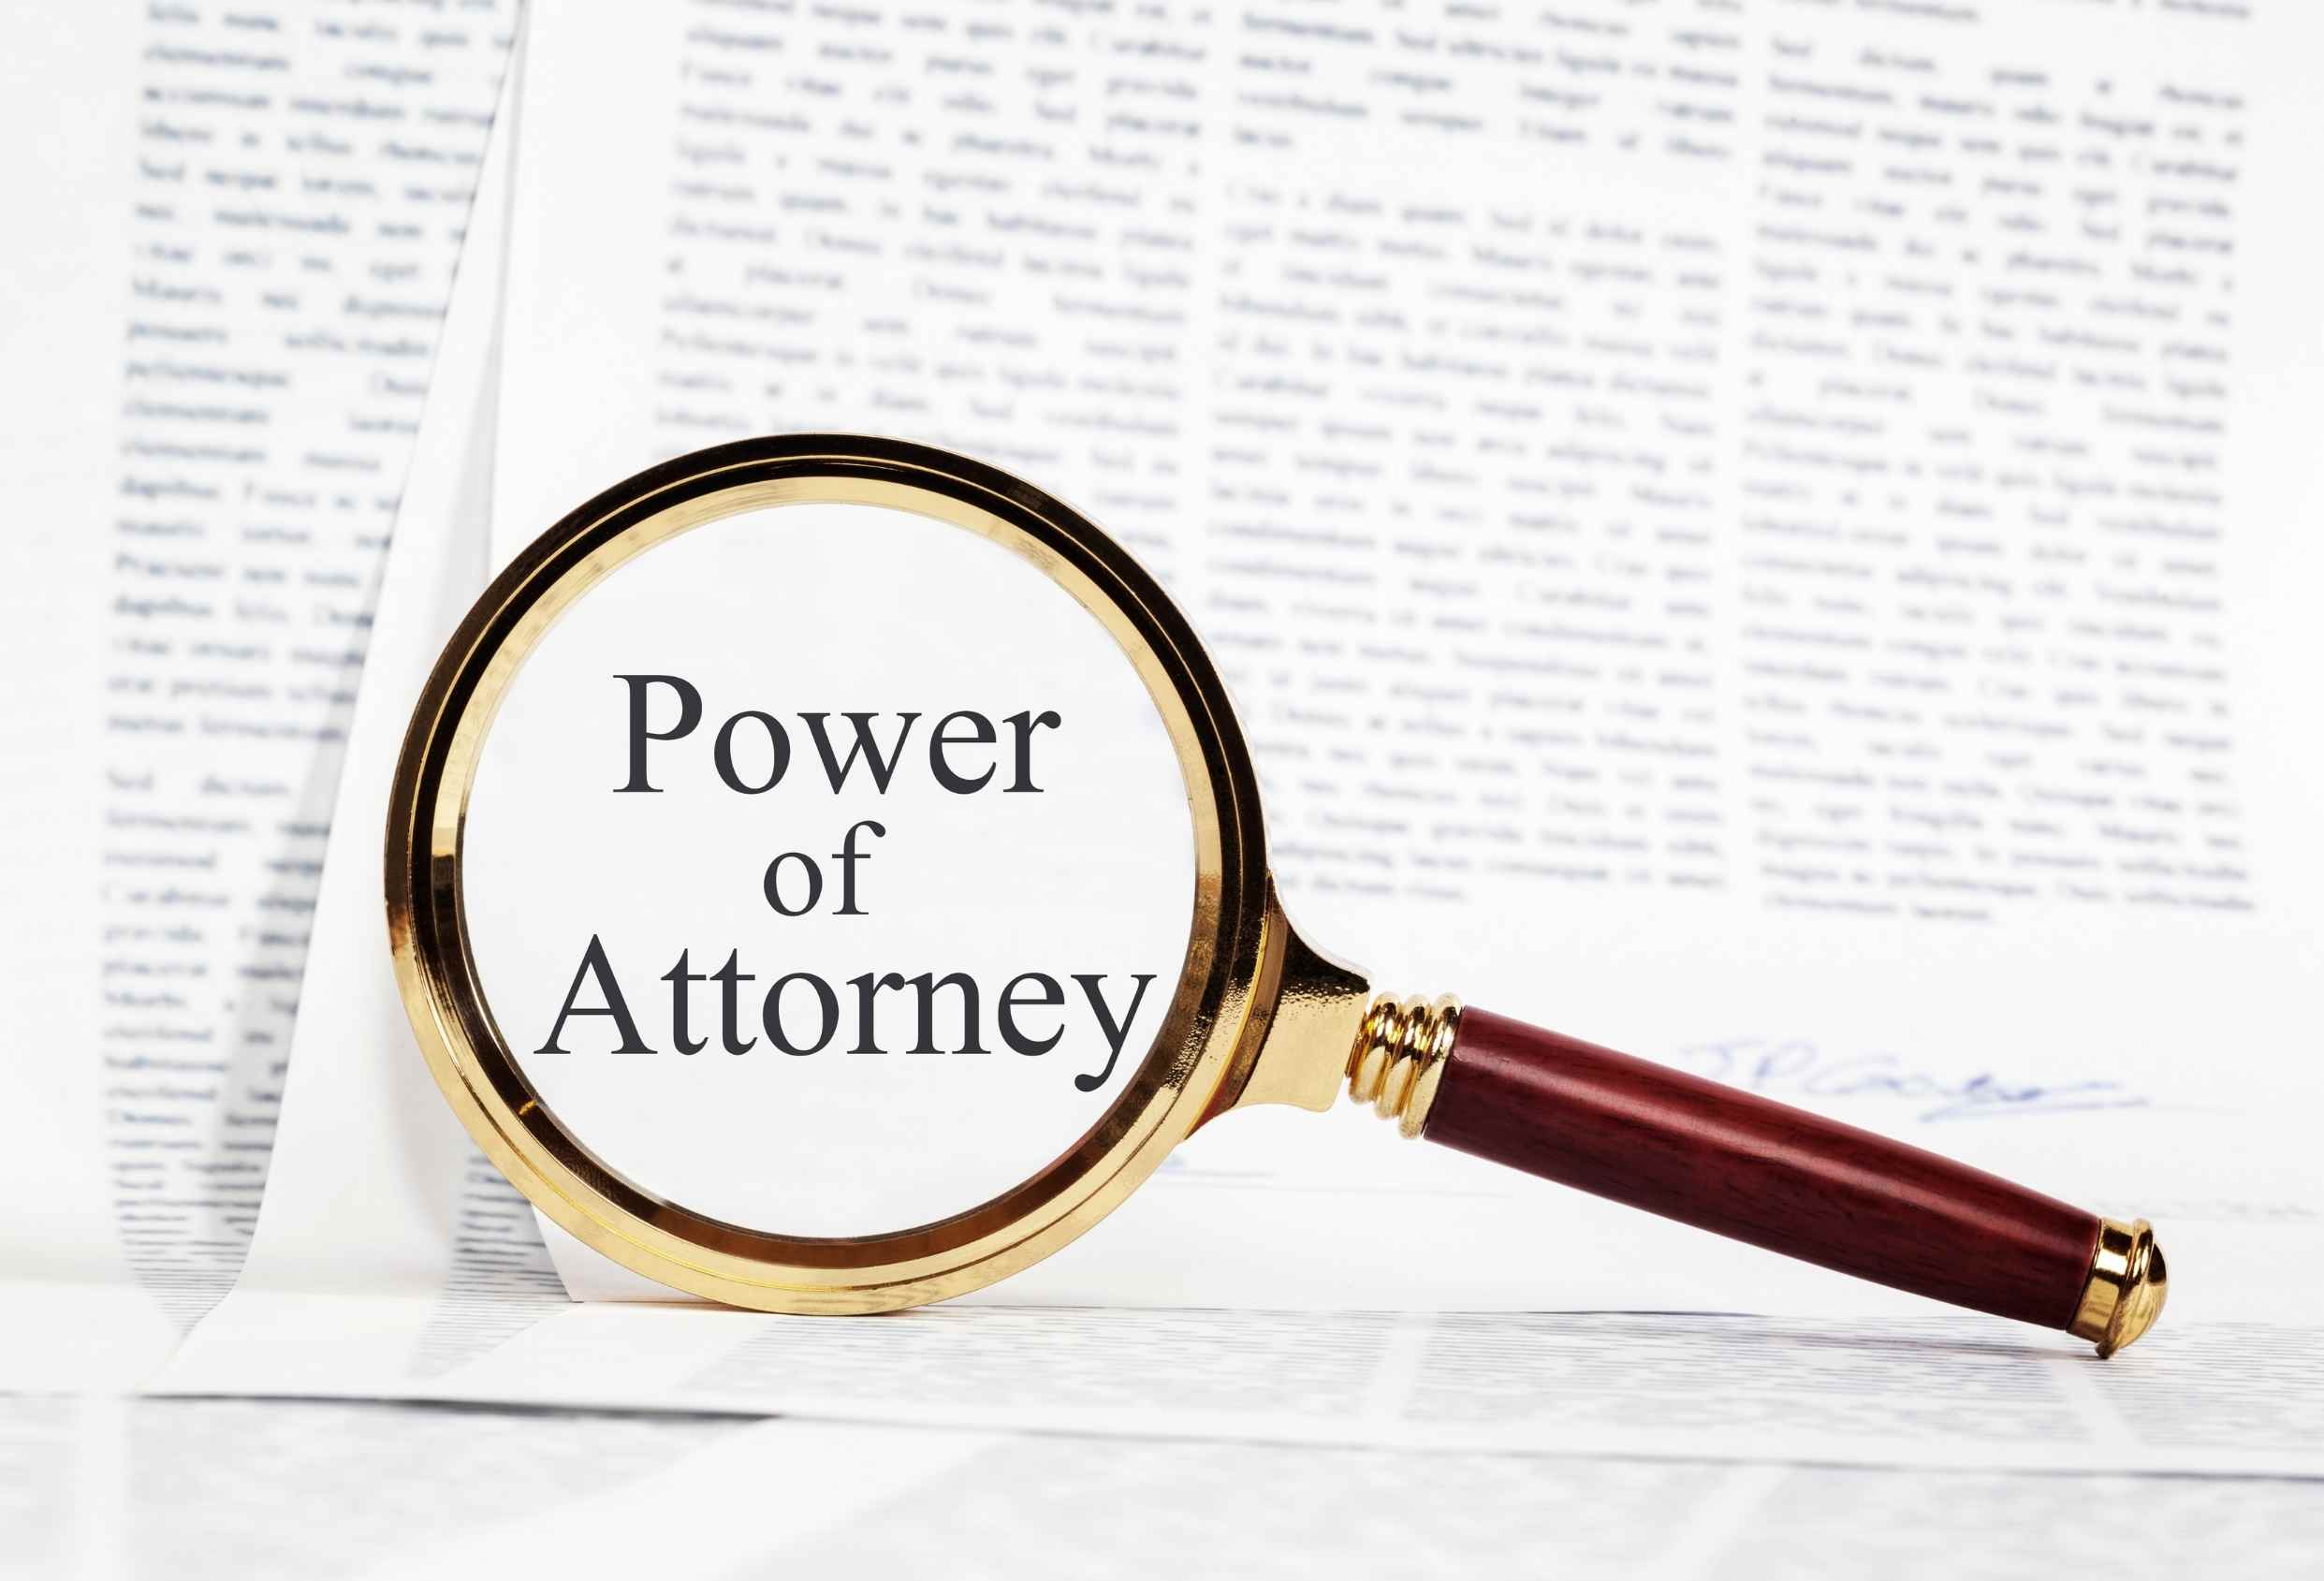 Abuse of Enduring Power of Attorney